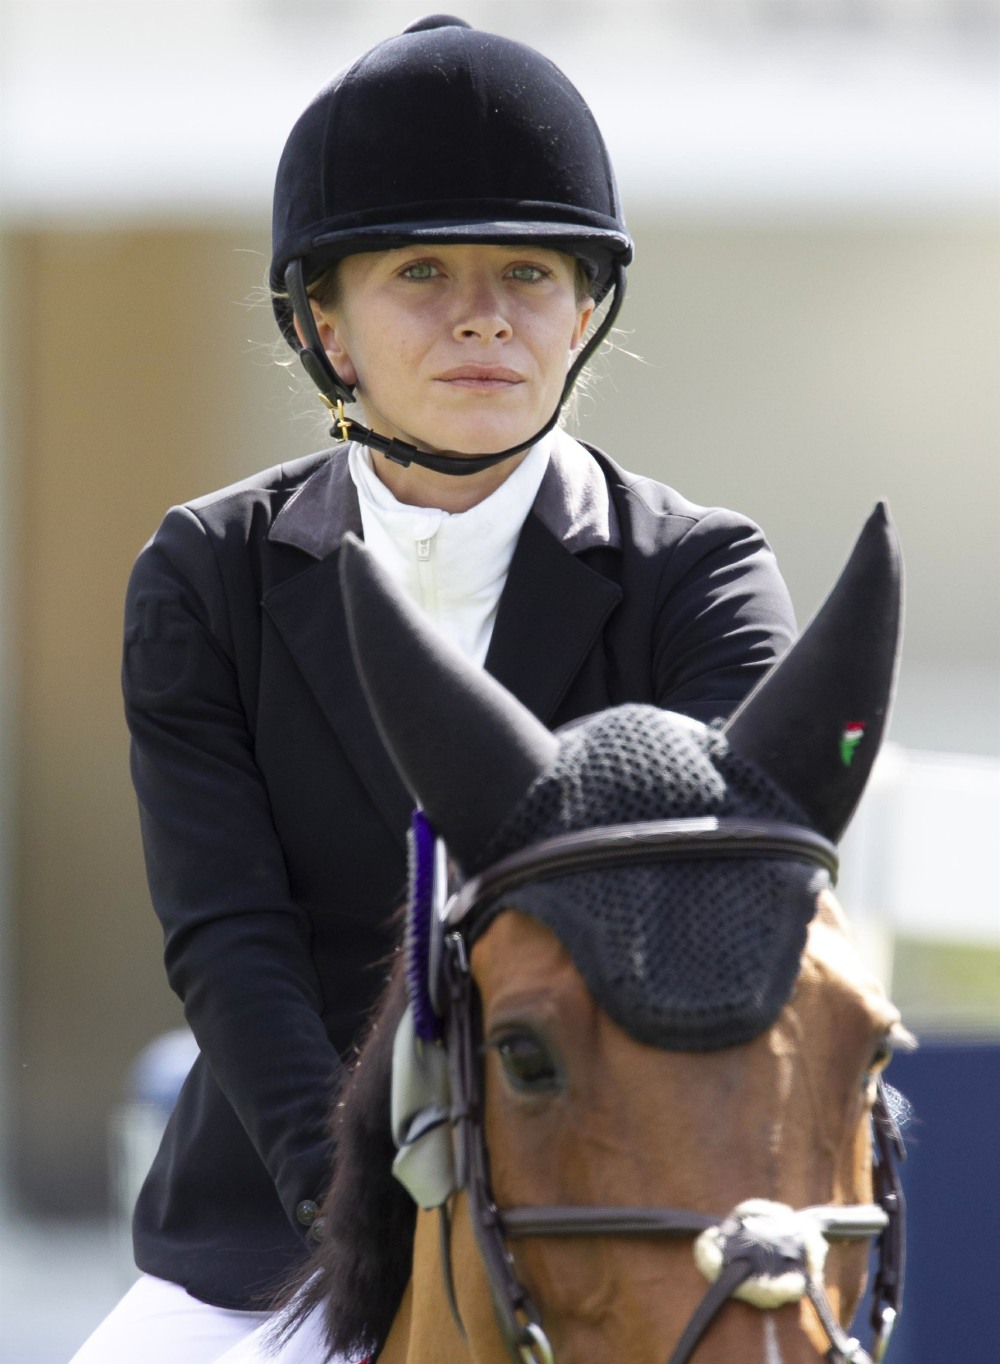 Mary-Kate Olsen Shows Off Her Equestrian Skills at Horseback Riding Competition in Madrid